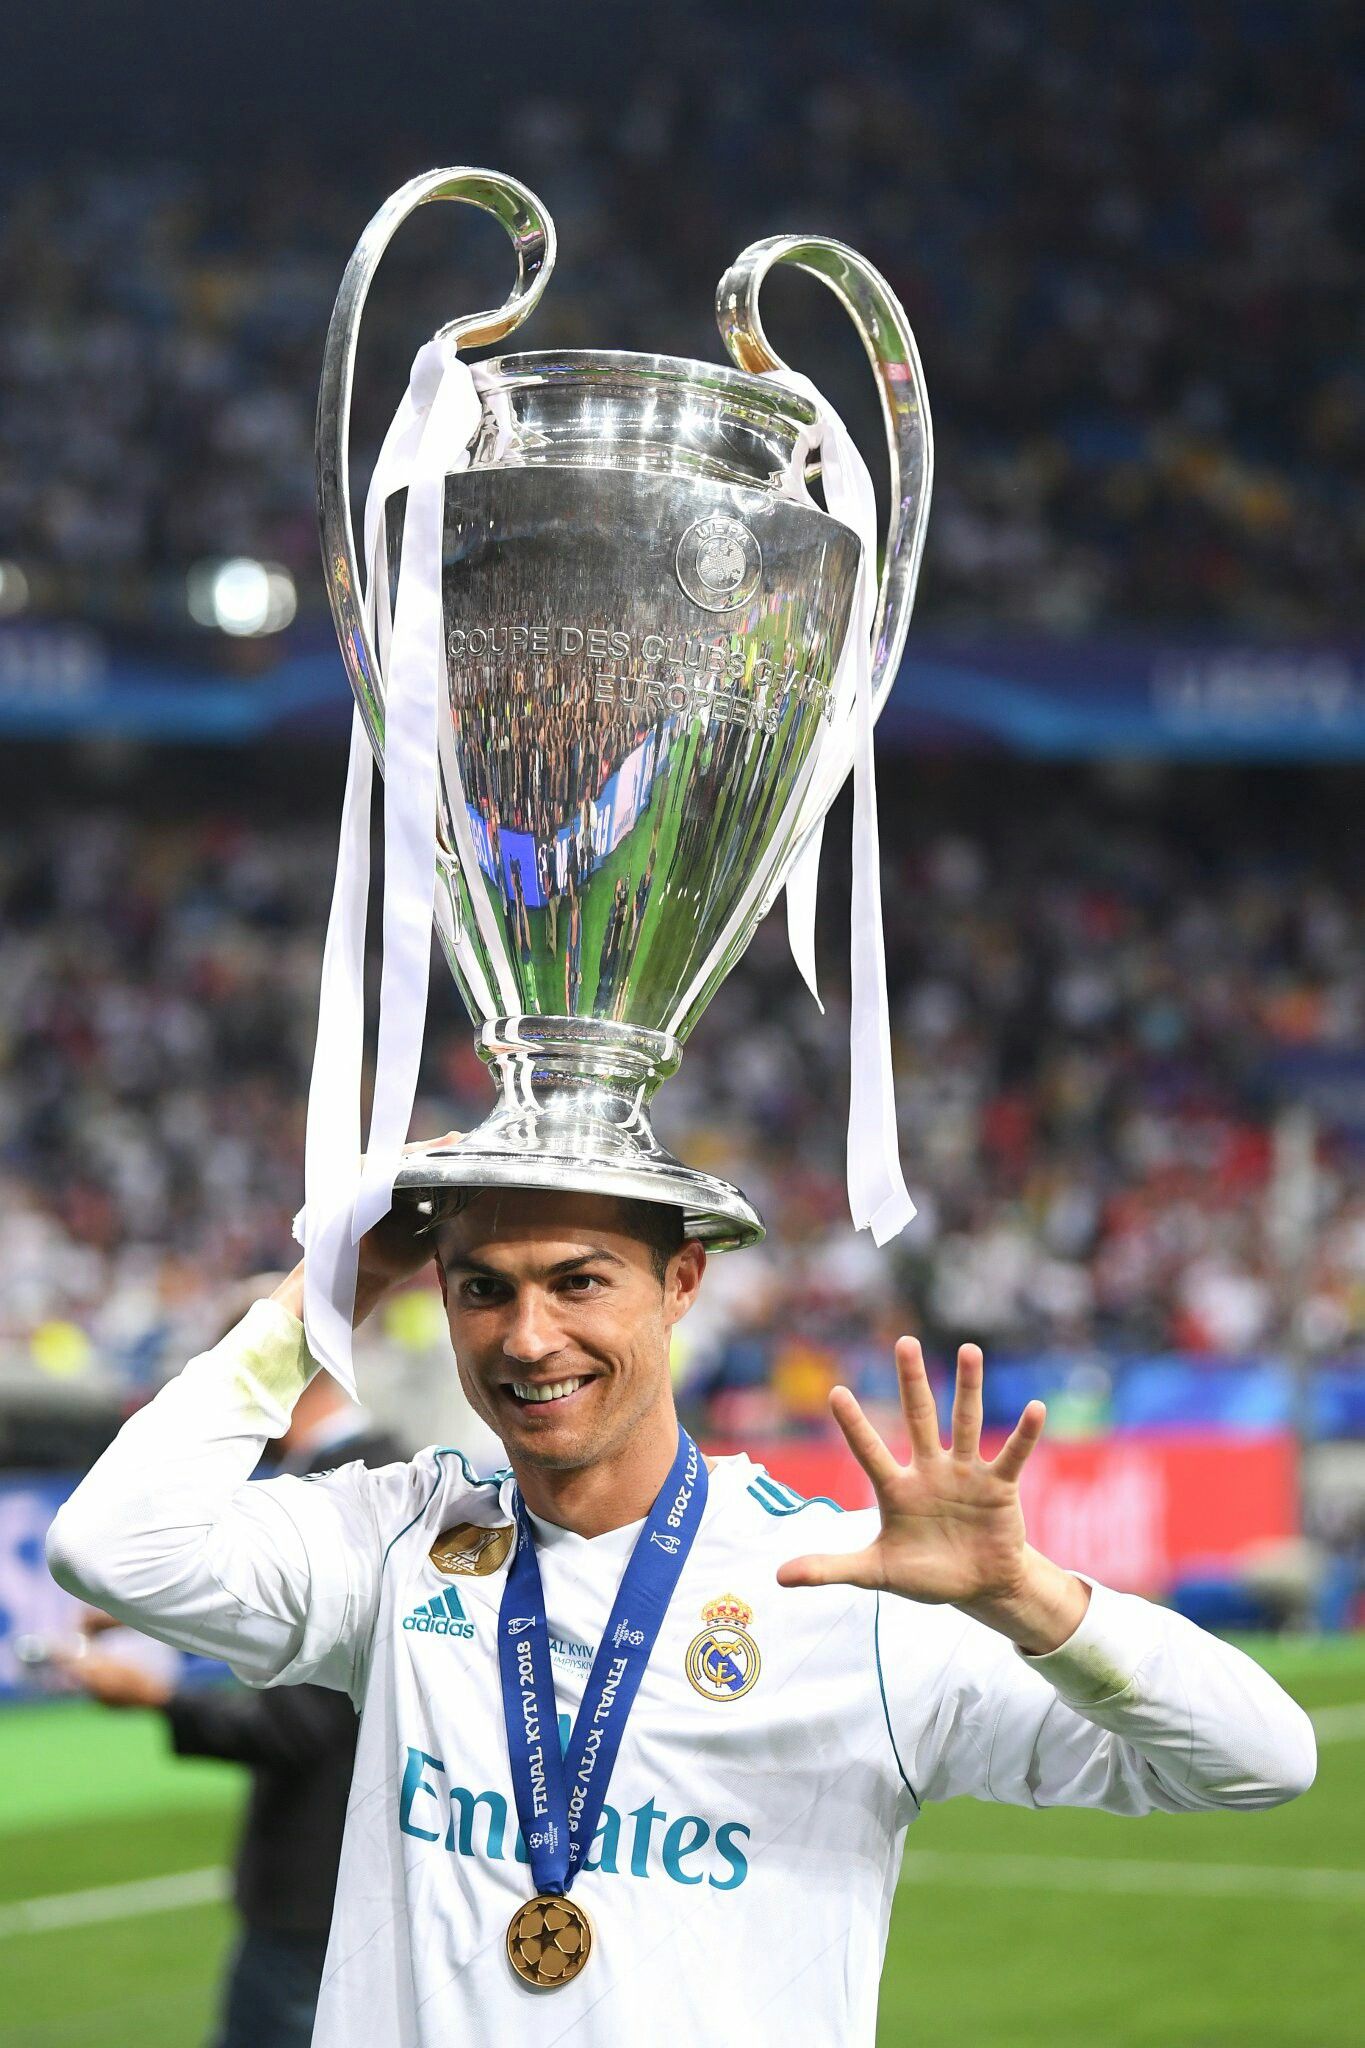 43+] Cristiano Ronaldo With UCL Trophy Wallpapers - WallpaperSafari